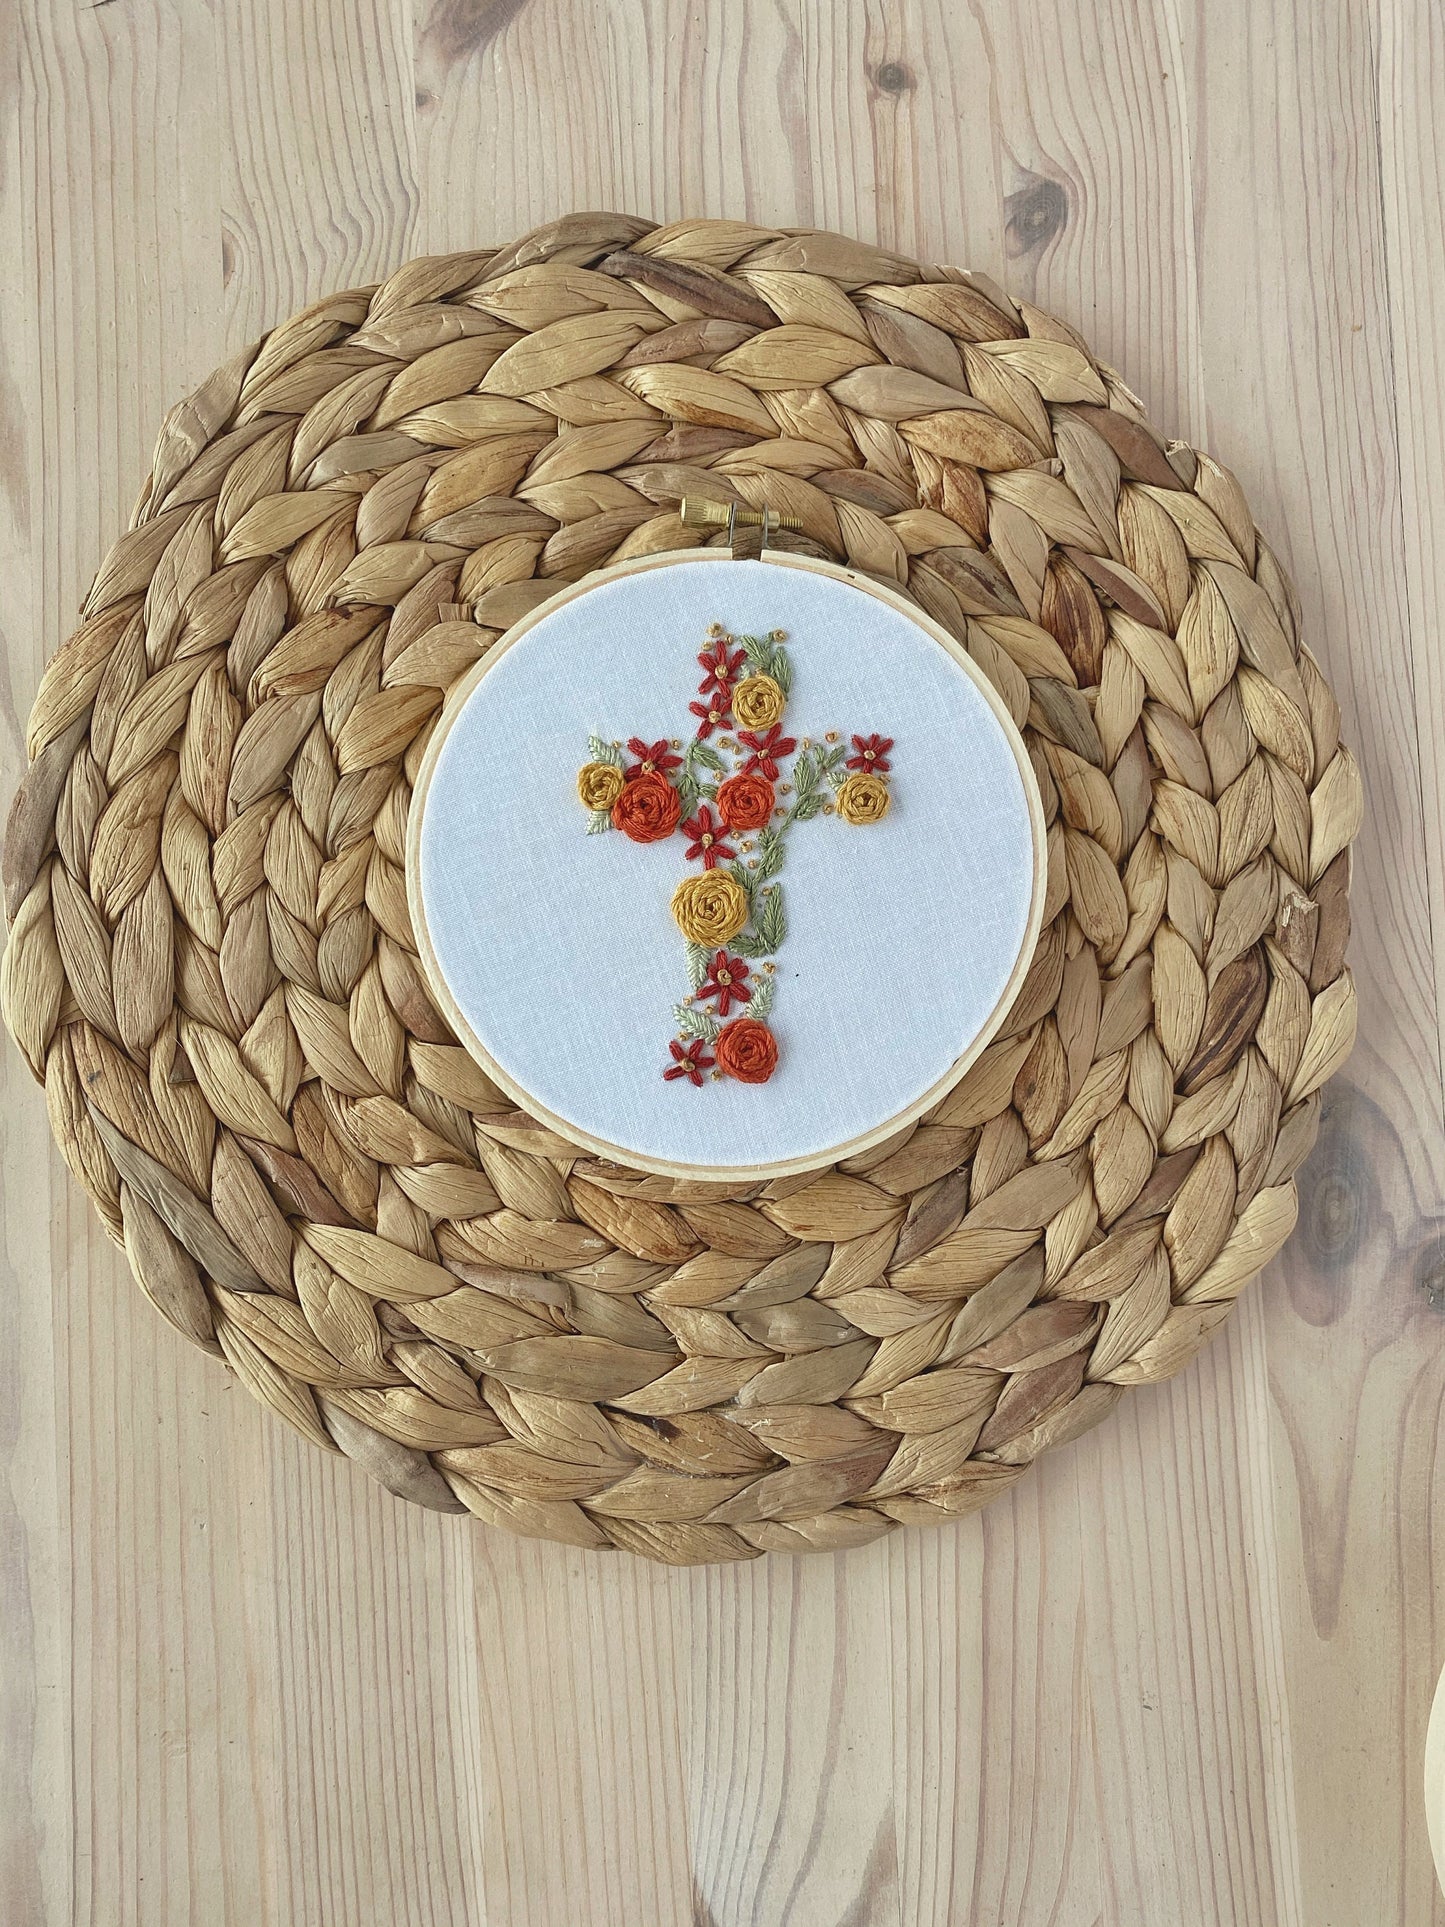 The Beautiful Cross | 5” | Modern Floral Cross Christian Embroidery Hoop Art for Home Decor